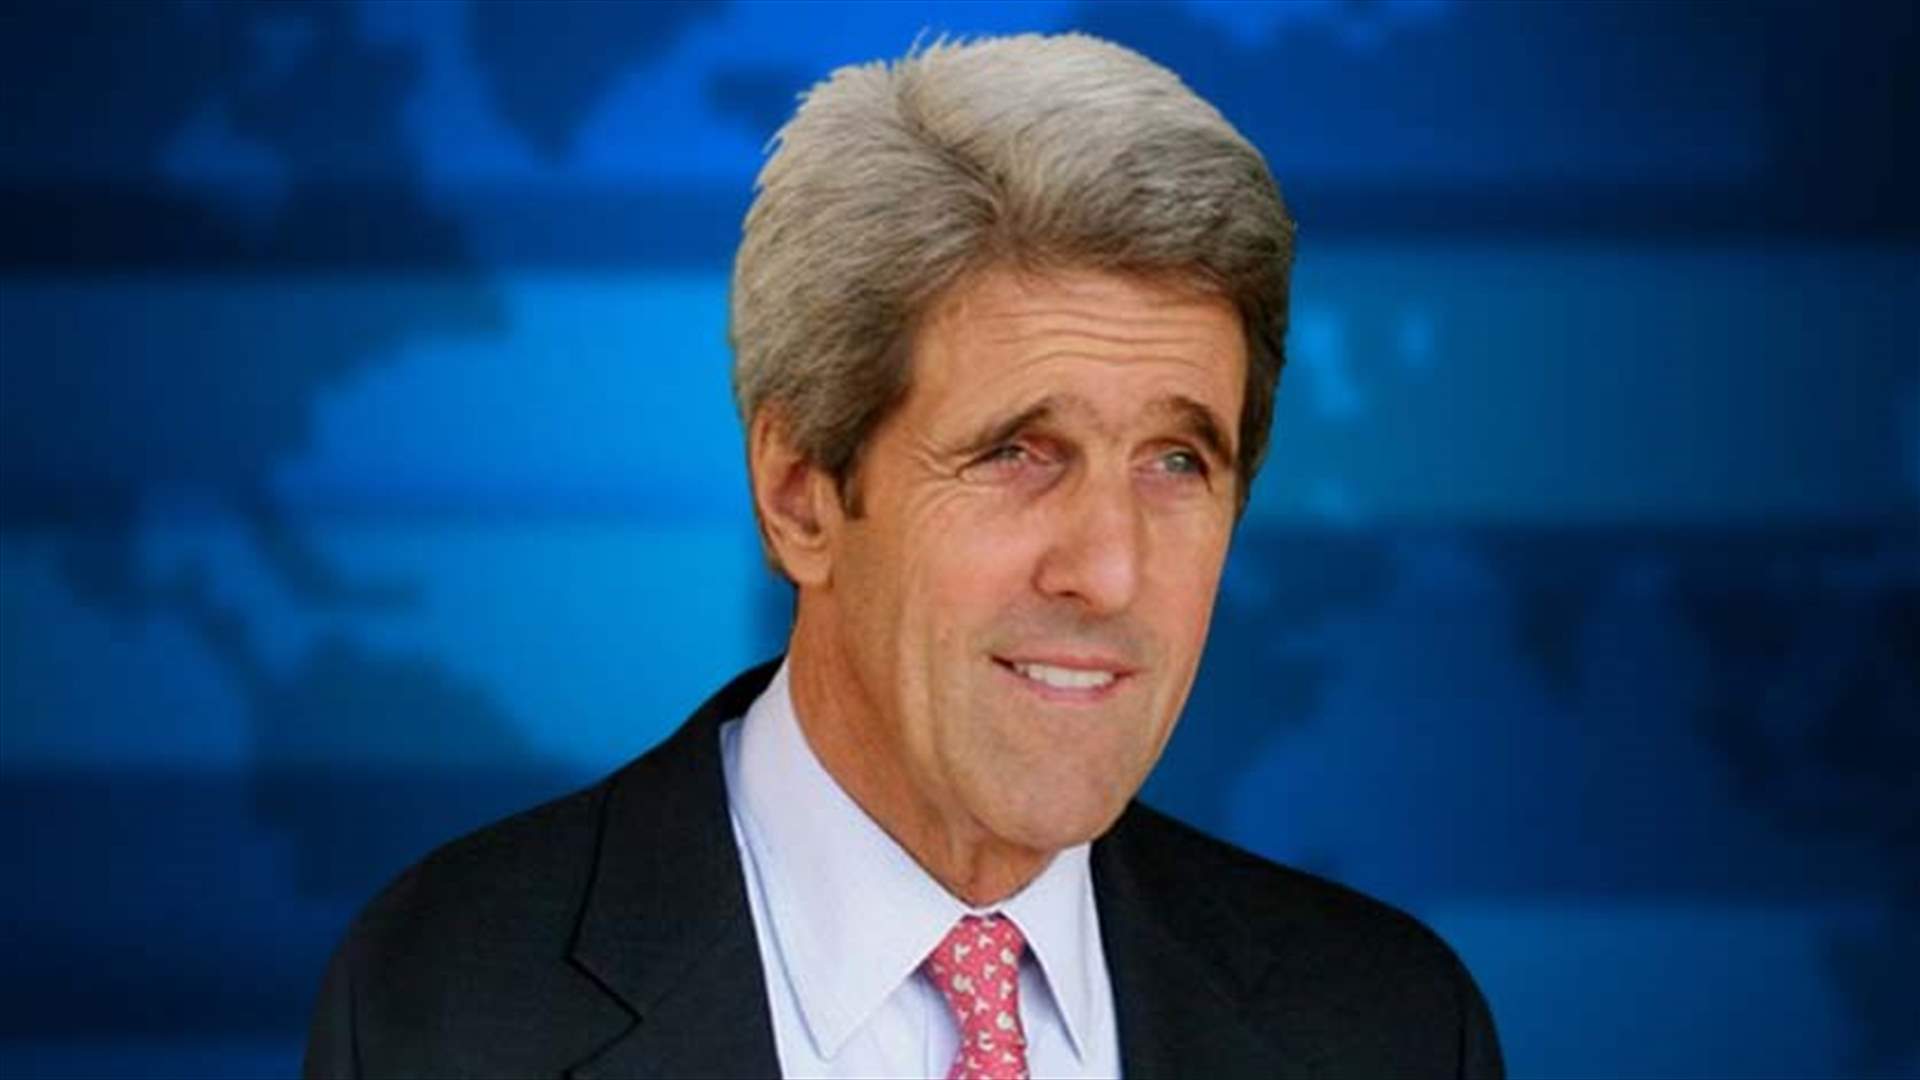 Kerry says Syria talks should go ahead as planned -US pool reporter